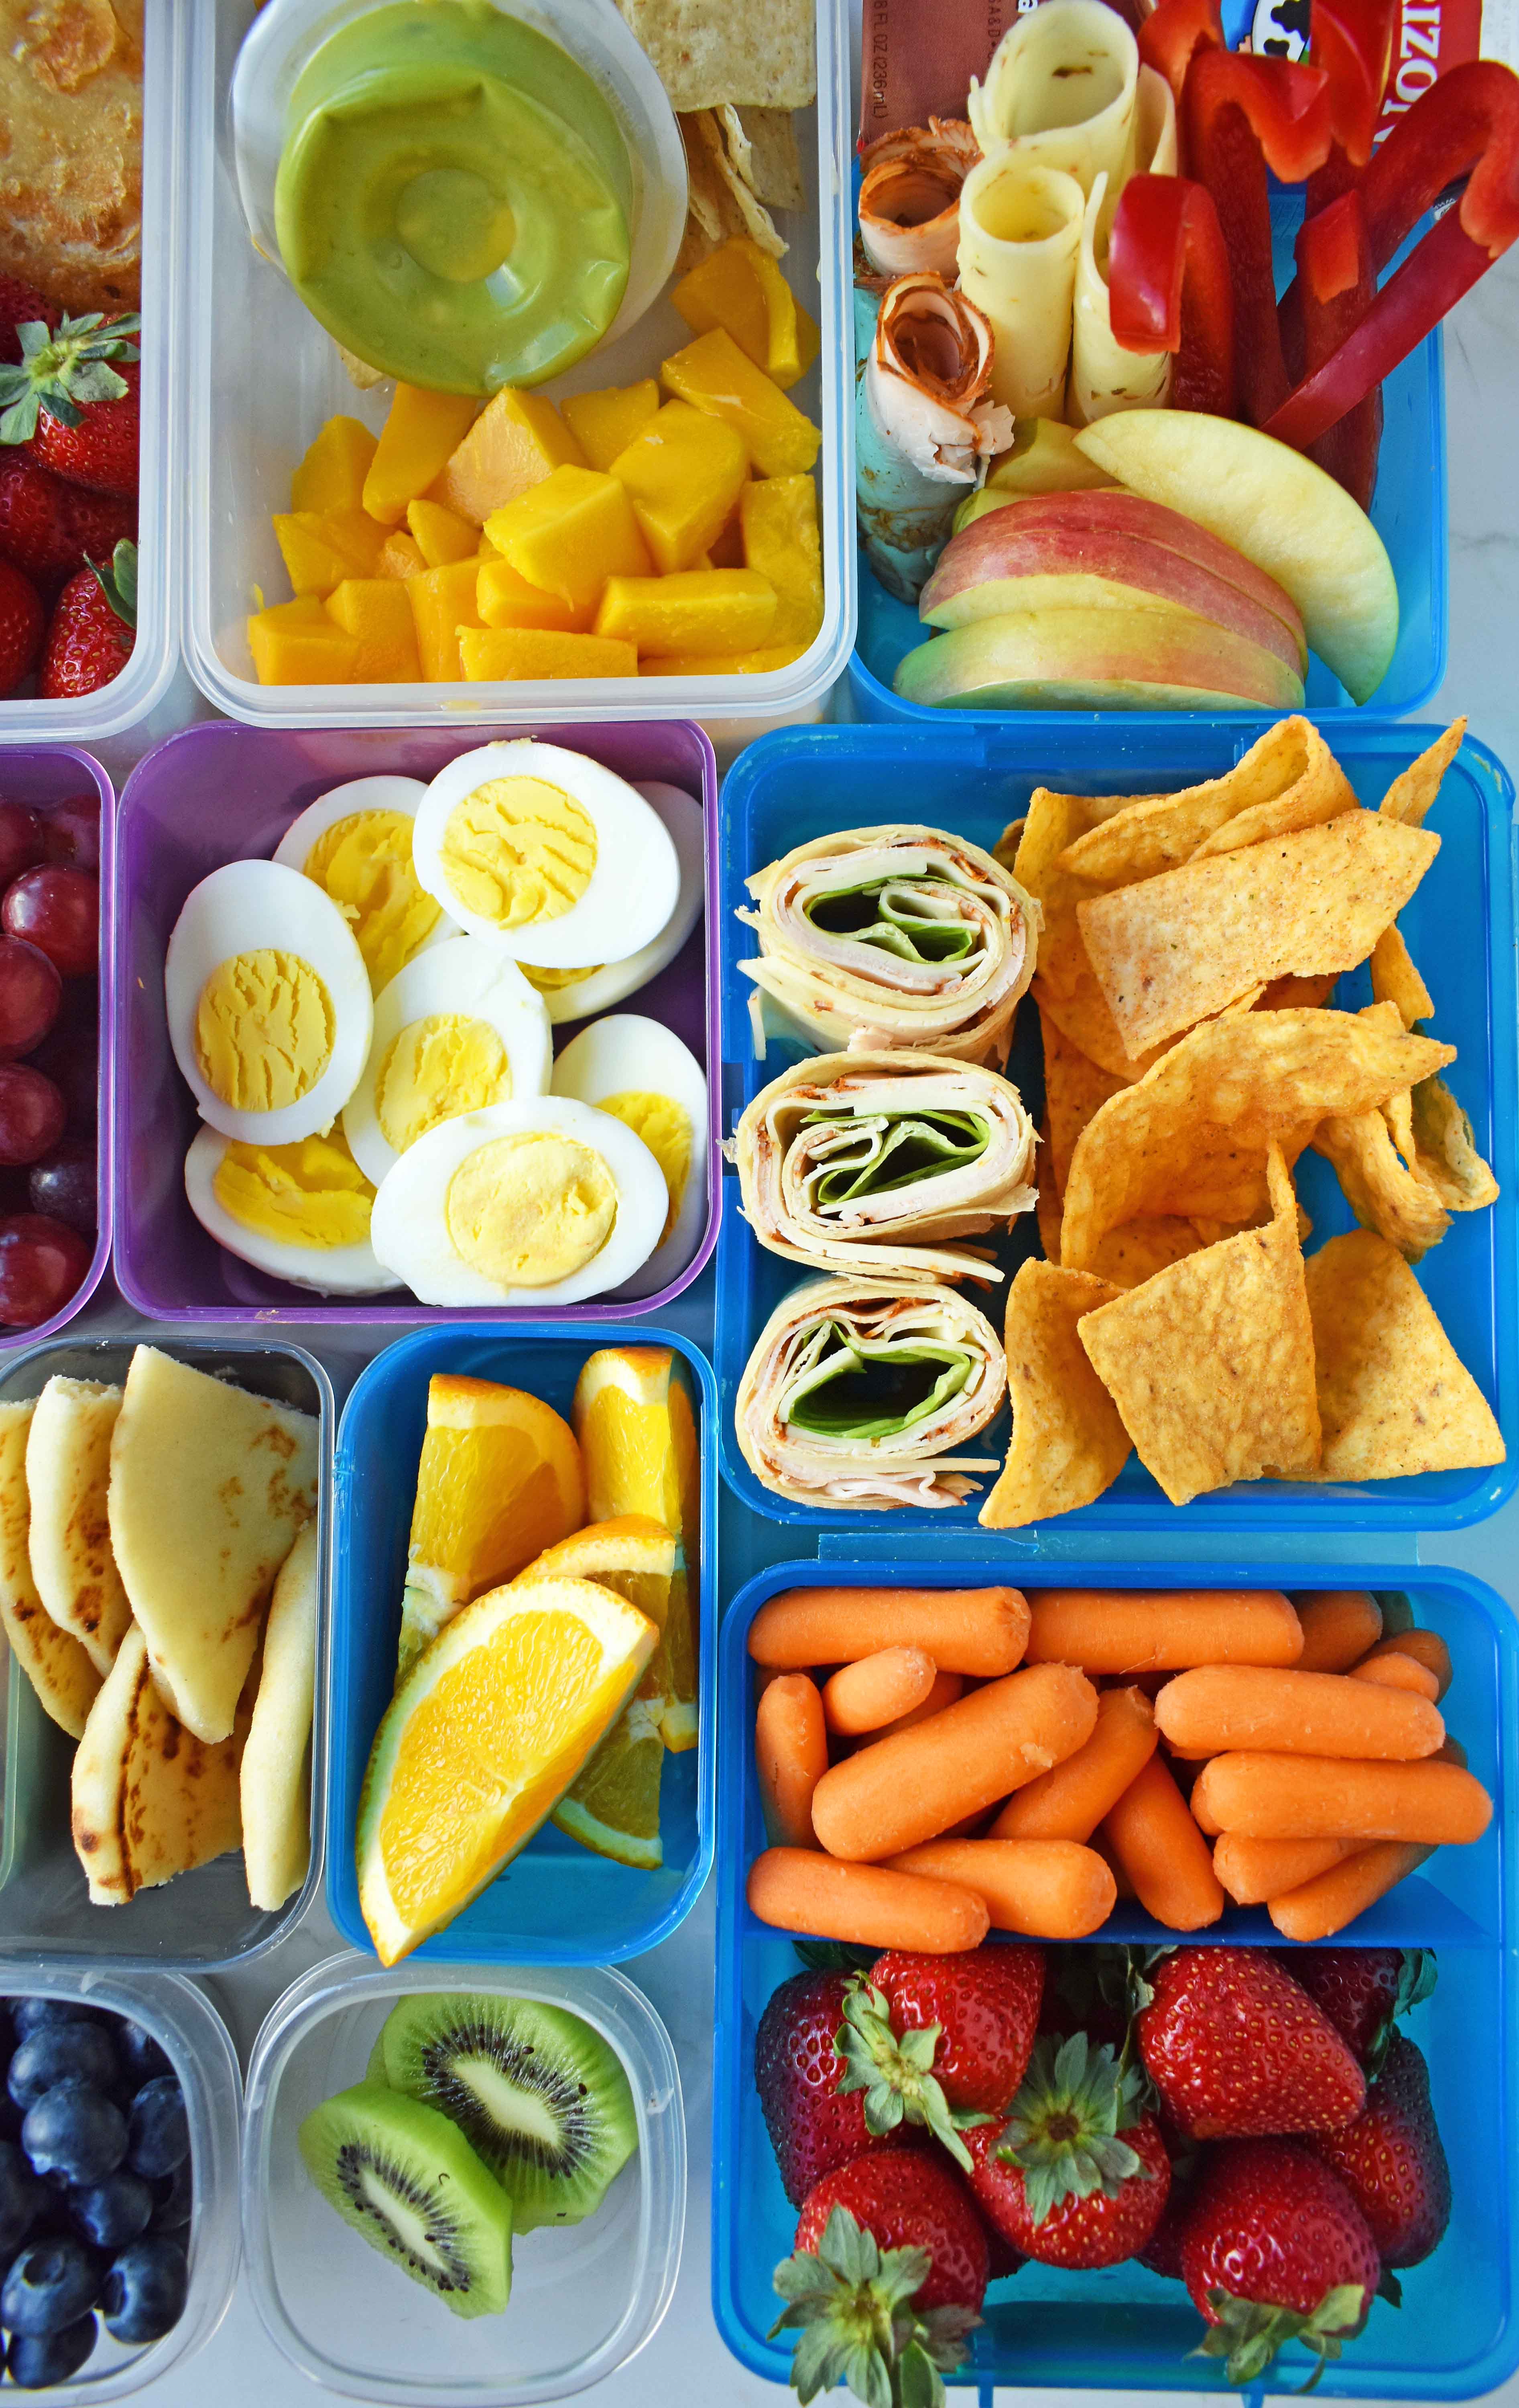 Back to School Kids Lunch Ideas. Healthy kids lunch ideas that includes wraps, roll-ups, sandwiches, quesadillas, gluten-free, meat and cheese kabobs, lunch snack ideas, and fresh fruits and veggies. Healthy lunch ideas by Modern Honey. f4vn.com